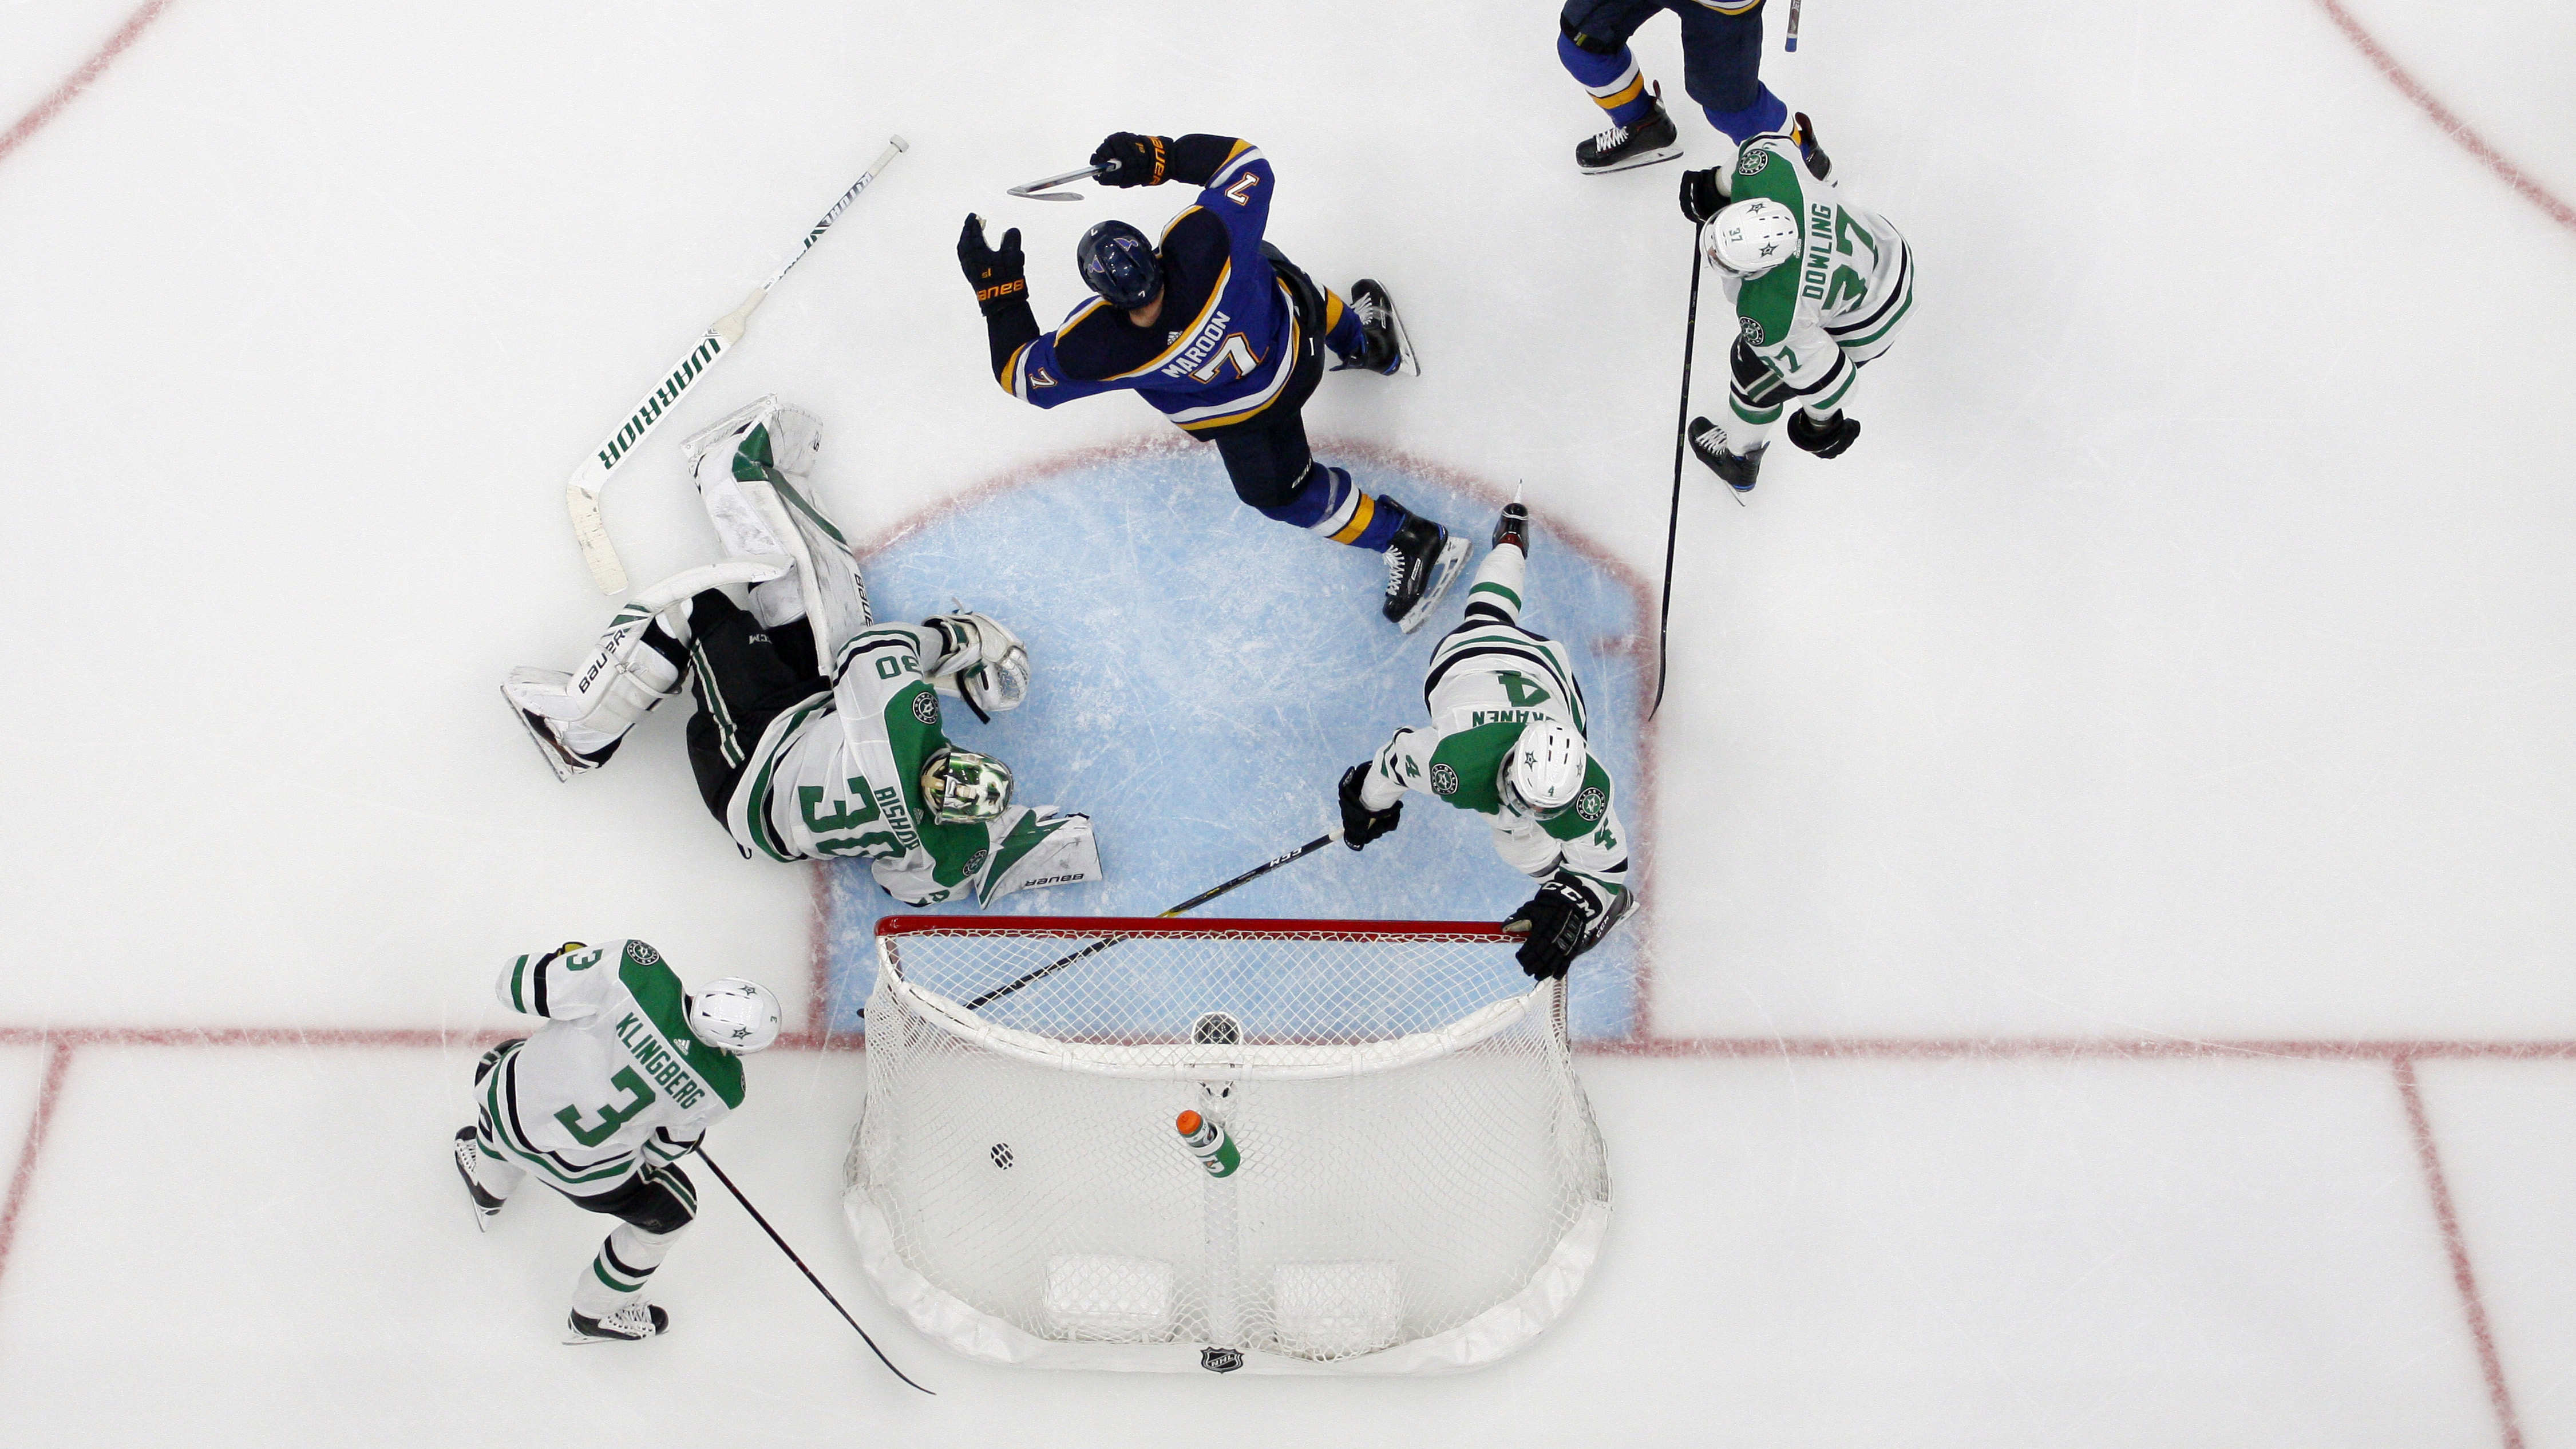 Maroon scores game-winner in double OT, lifts Blues to 2-1 Game 7 win over Stars